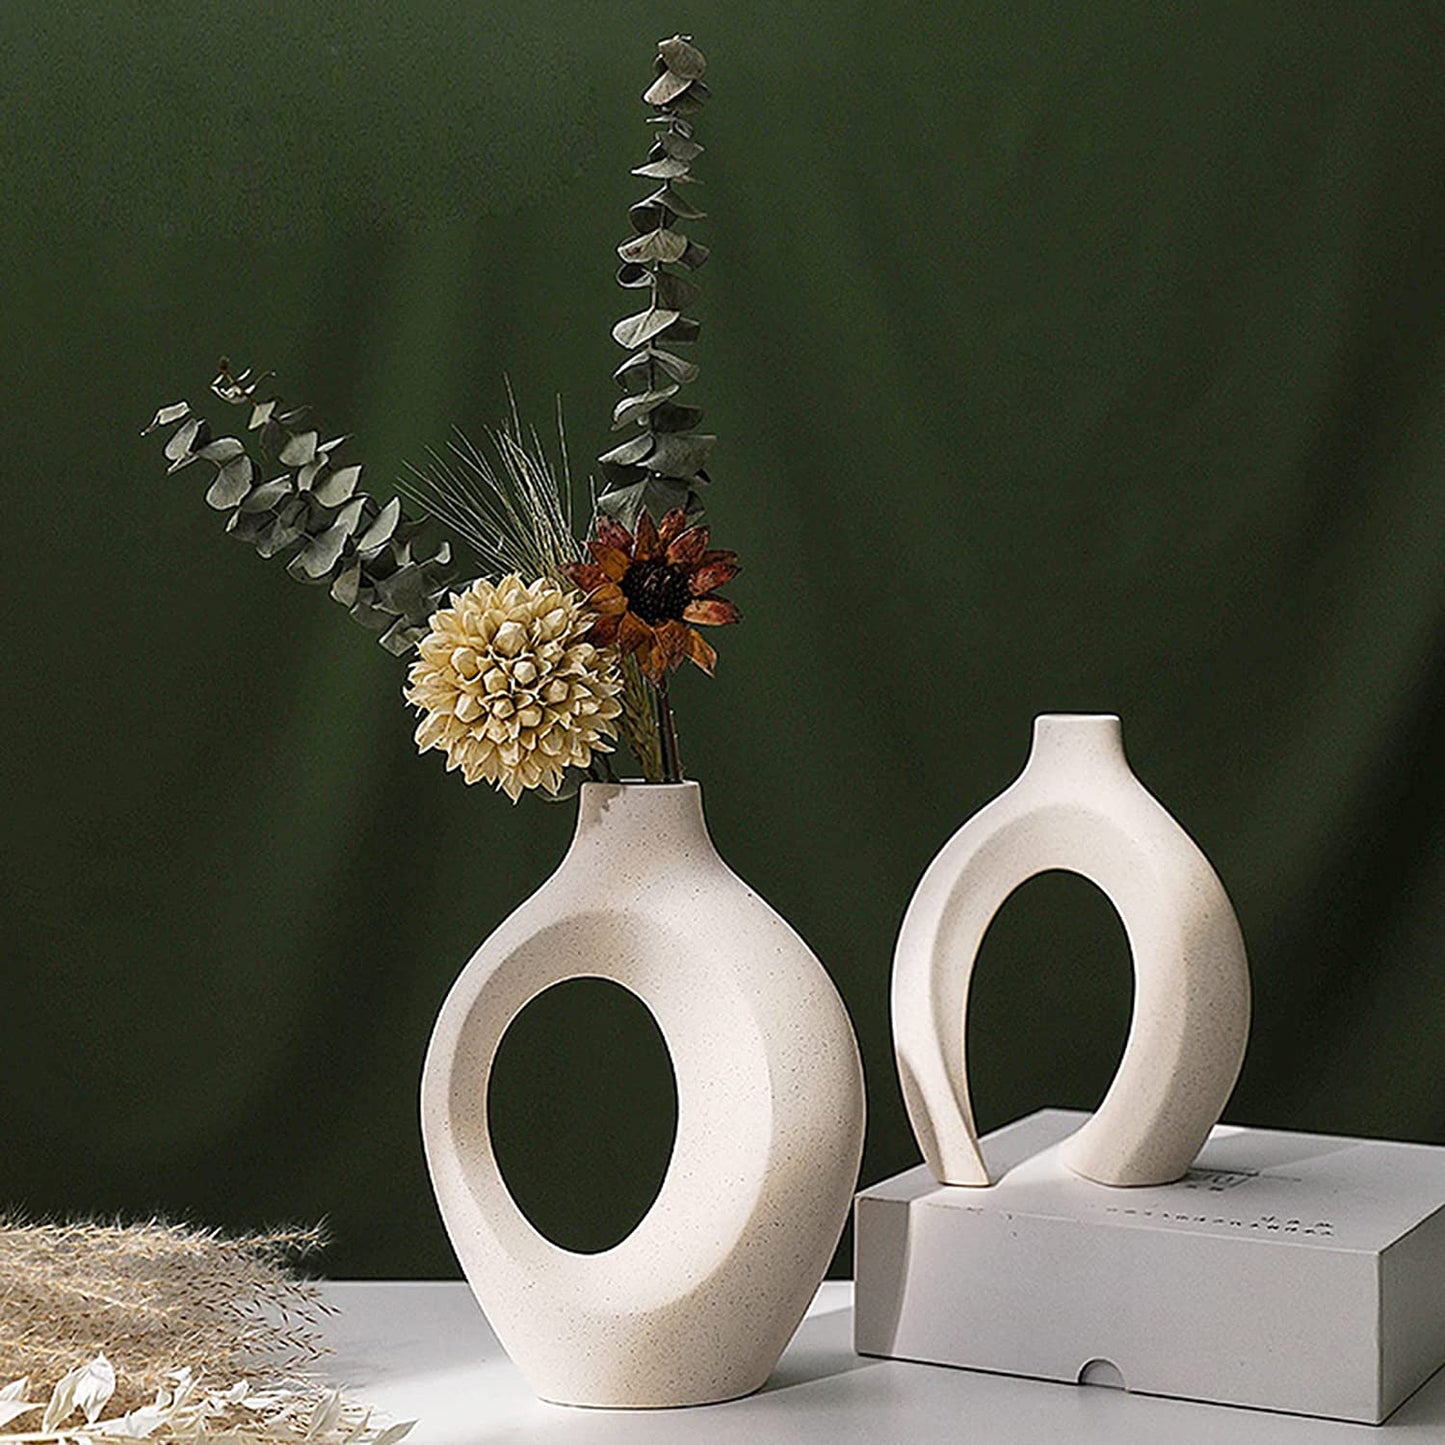 DACOSTIC Hollow Ceramic Vase Set of 2 for Modern Home Decor